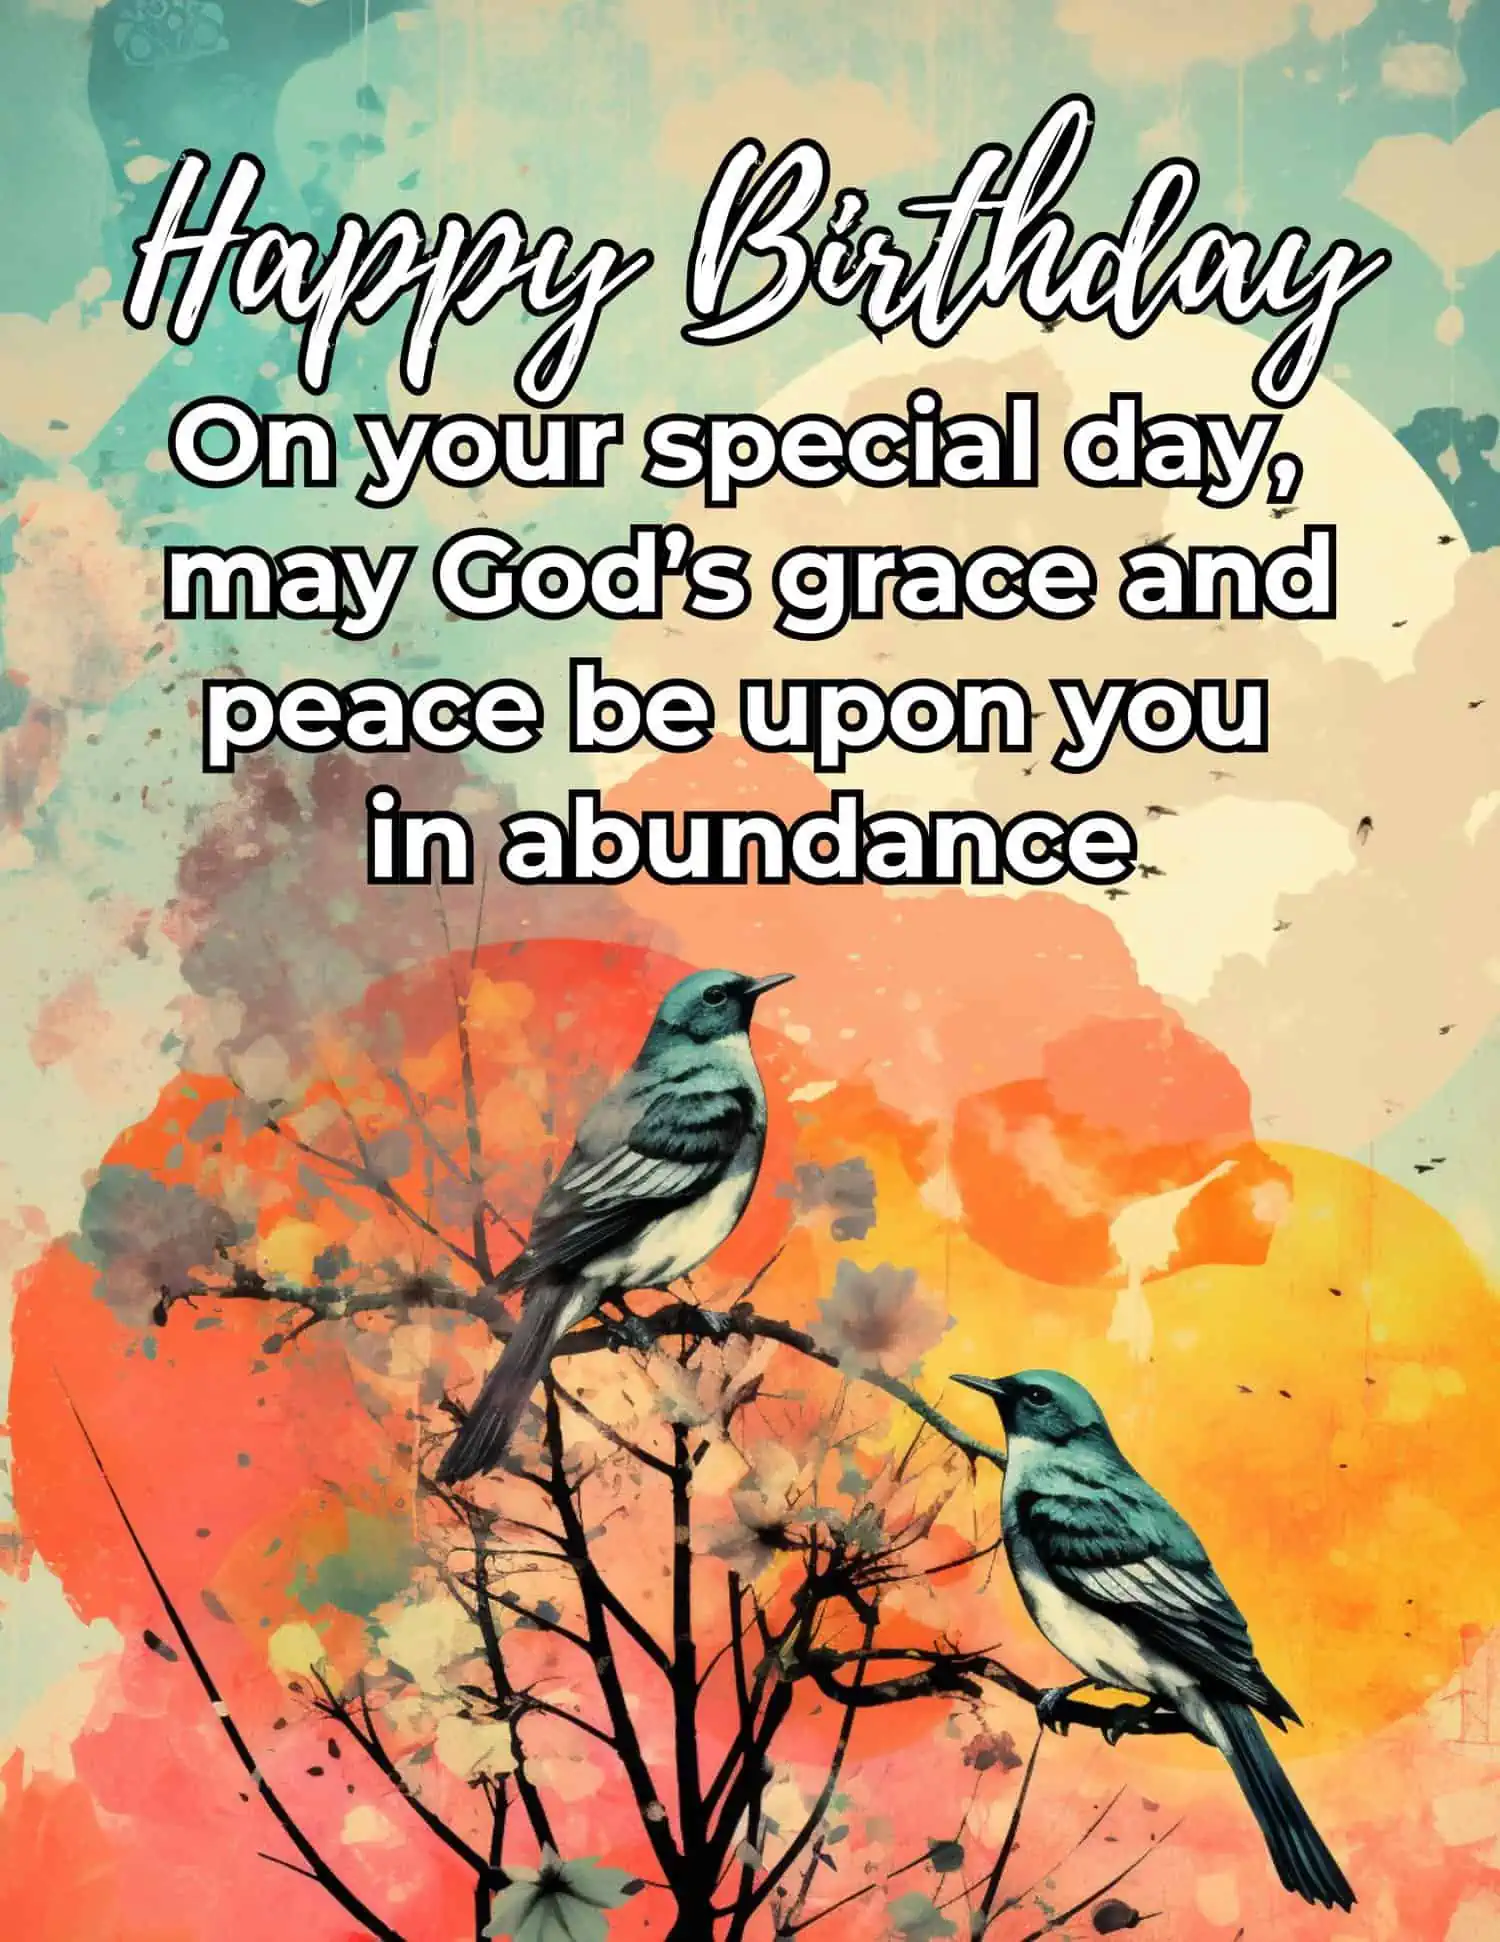 Express your heartfelt wishes with these unique and thoughtful birthday prayers and blessings for a friend.